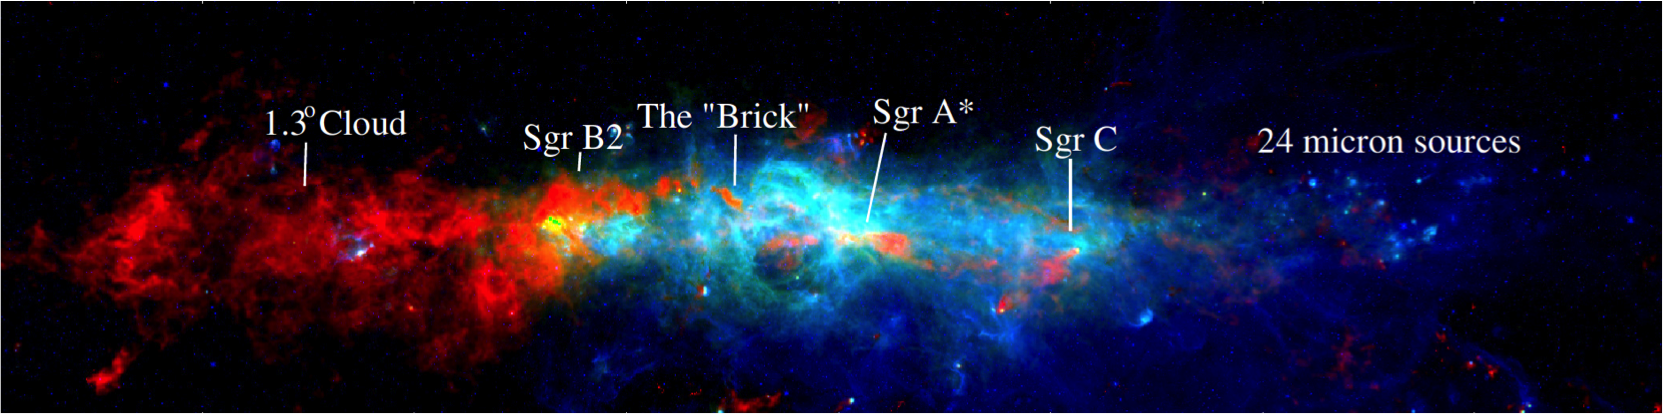 The Central Molecular Zone of our Galaxy